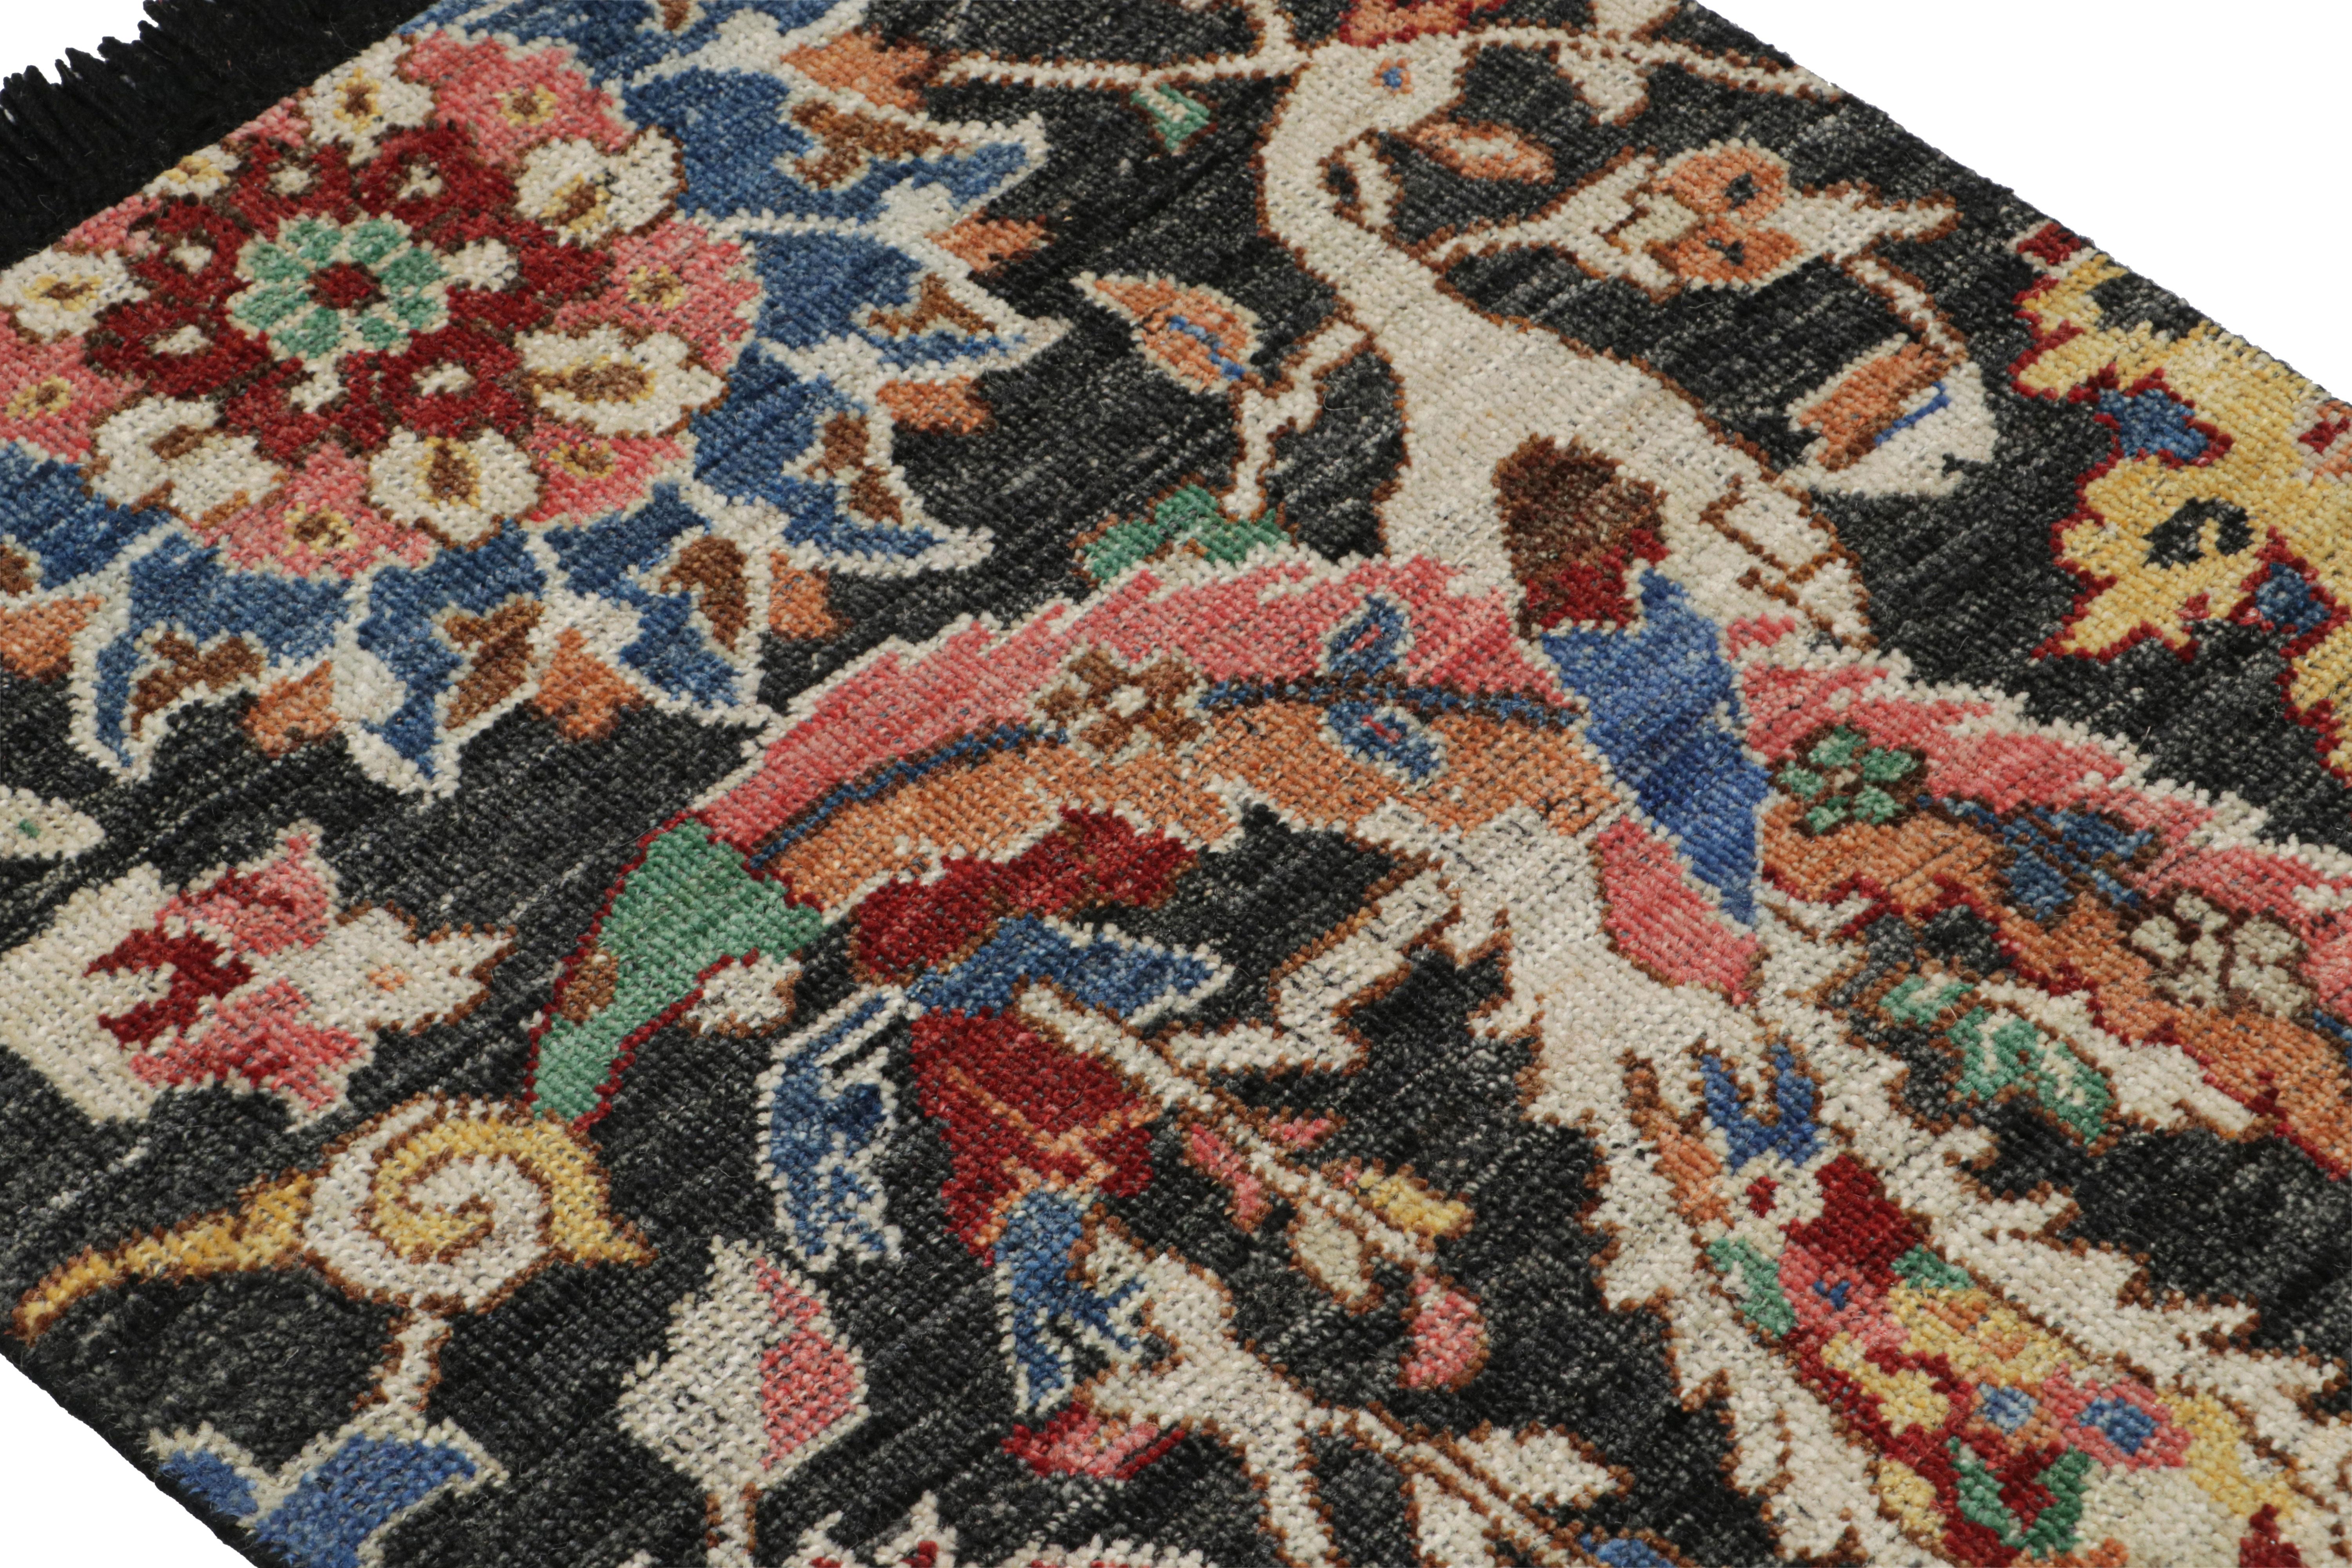 Indian Rug & Kilim’s Persian Kerman Style Rug in Black with Vibrant Floral Patterns  For Sale